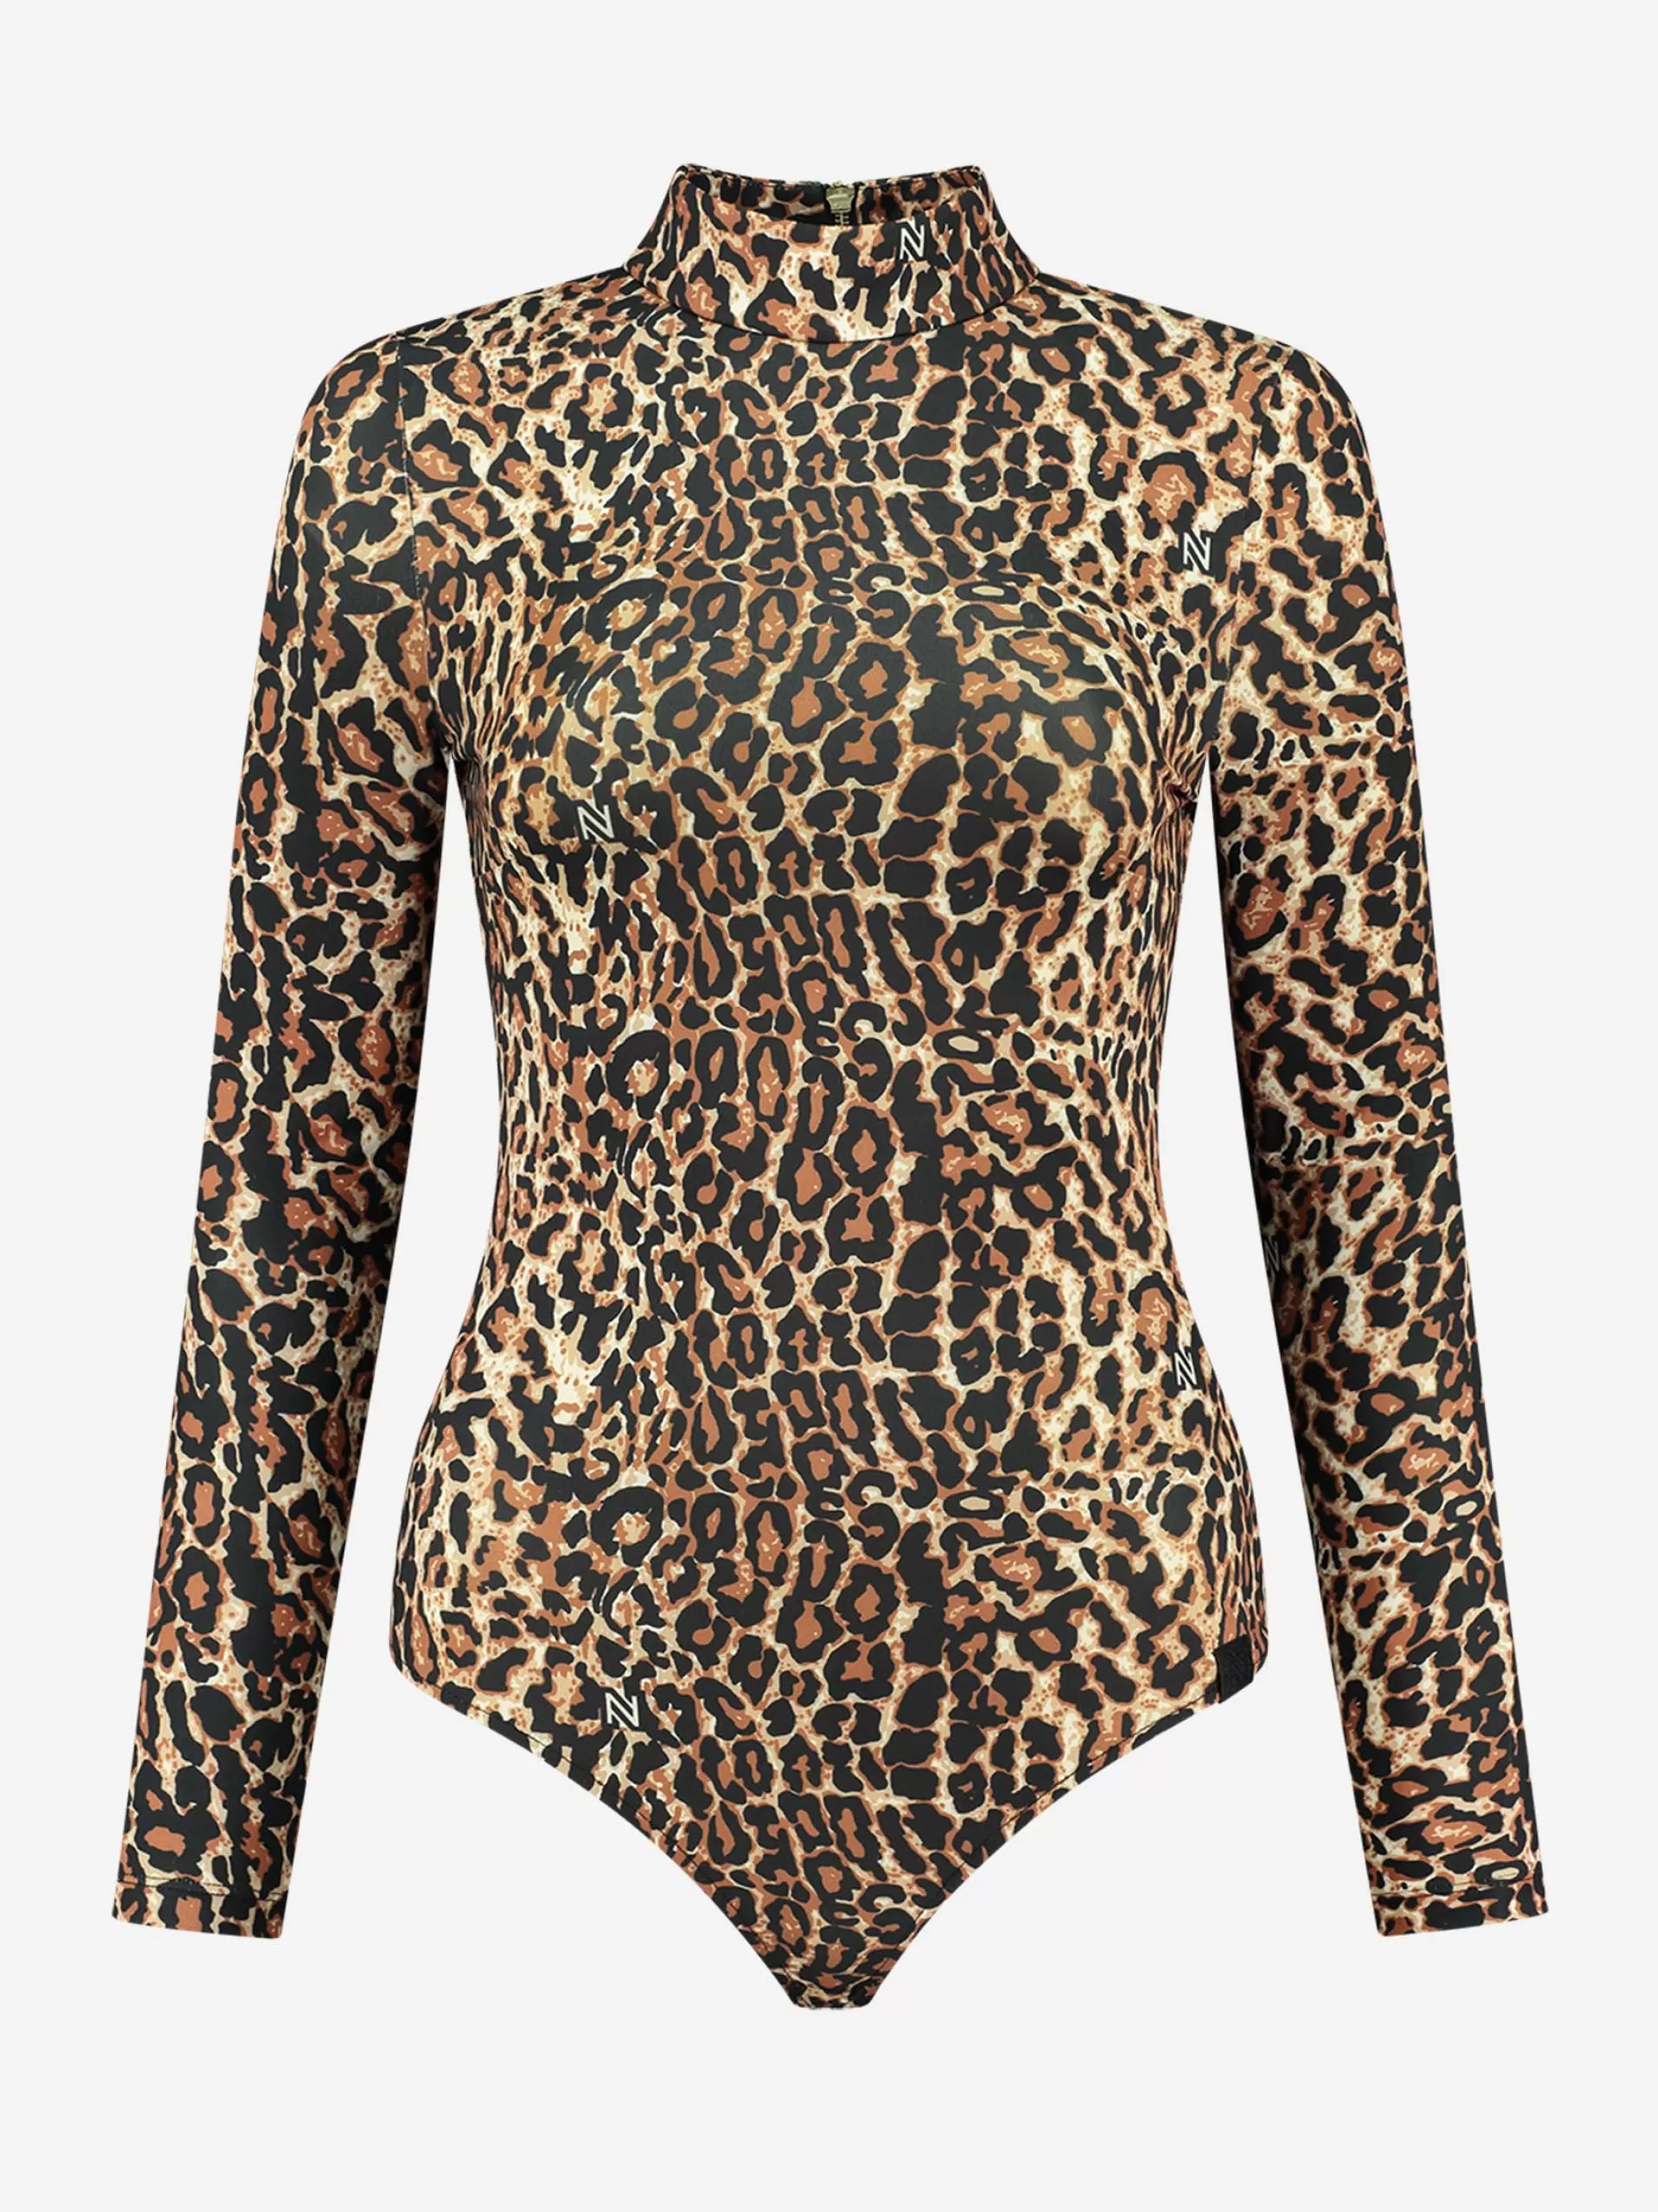 Flash Sale FITTED BODY MET LUIPAARDPRINT Tops | Selected by Kate Moss